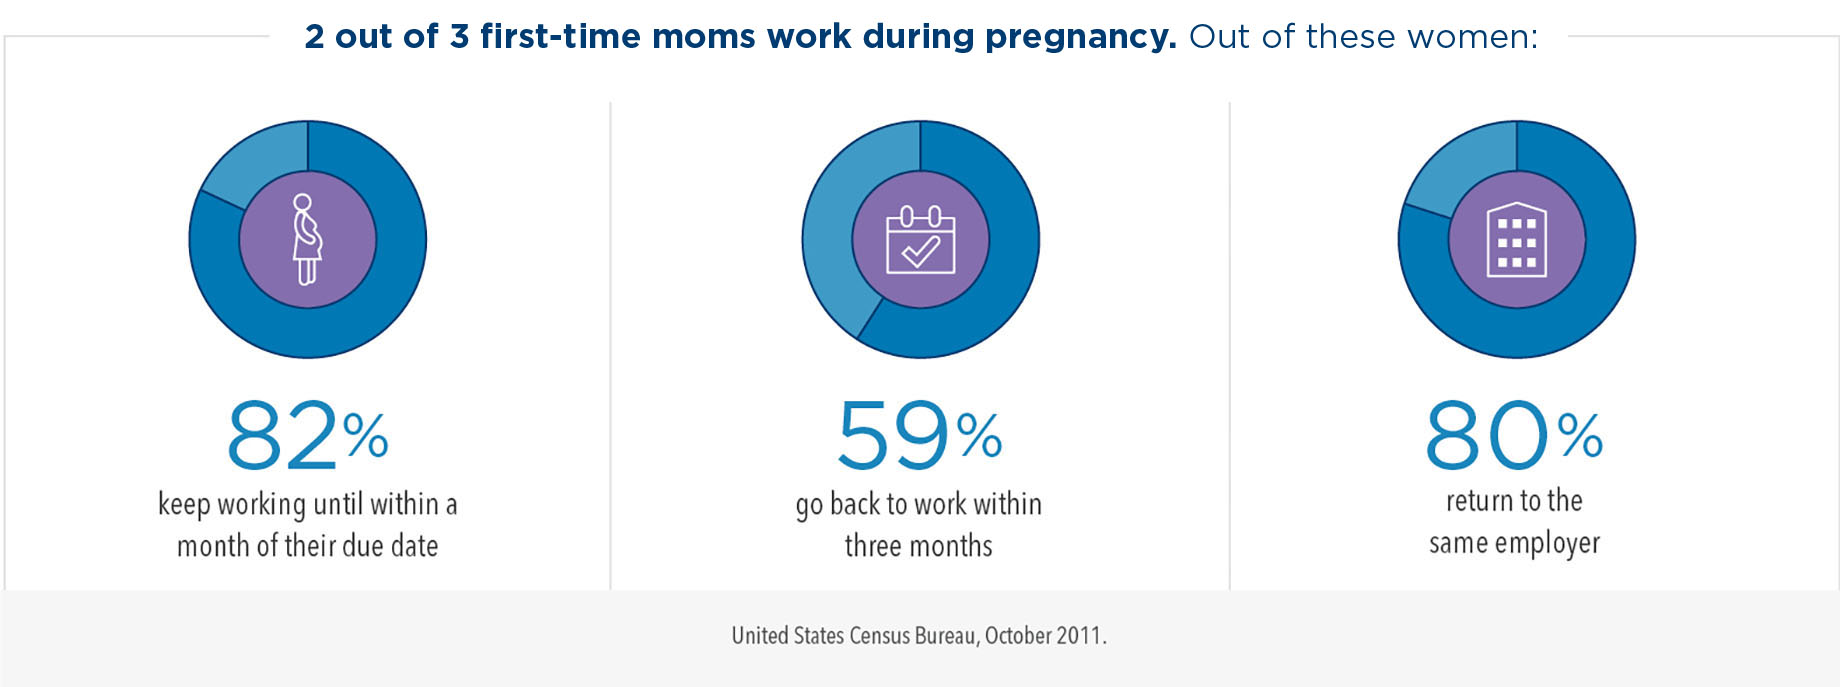 Two out of three first-time moms work during pregnancy. Out of these women, 82% keep working until within a month of their due date, 59% go back to work within three months, and 80% return to the same employer.